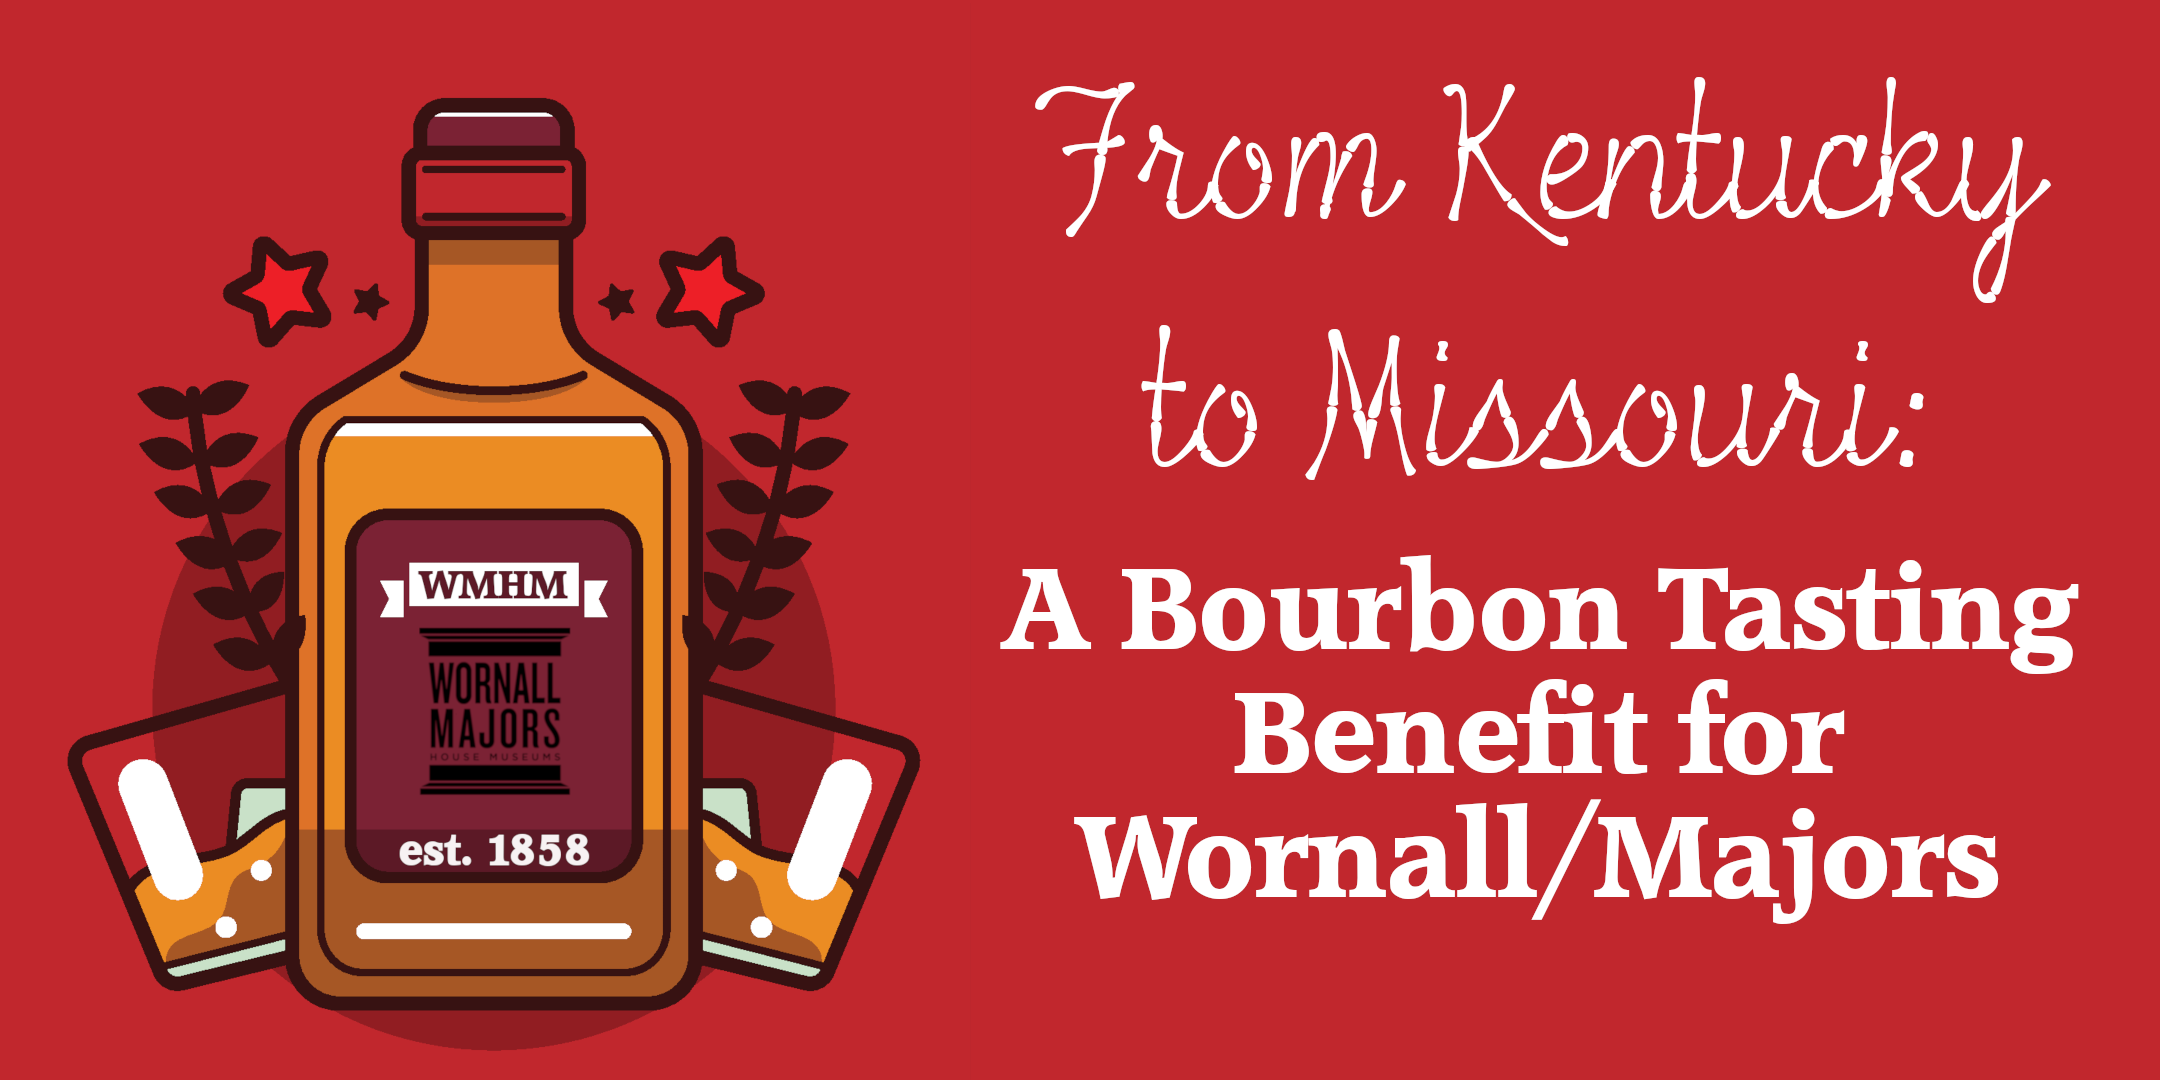 Thumbnail for the post titled: From Kentucky to Missouri: A Bourbon Tasting Benefit